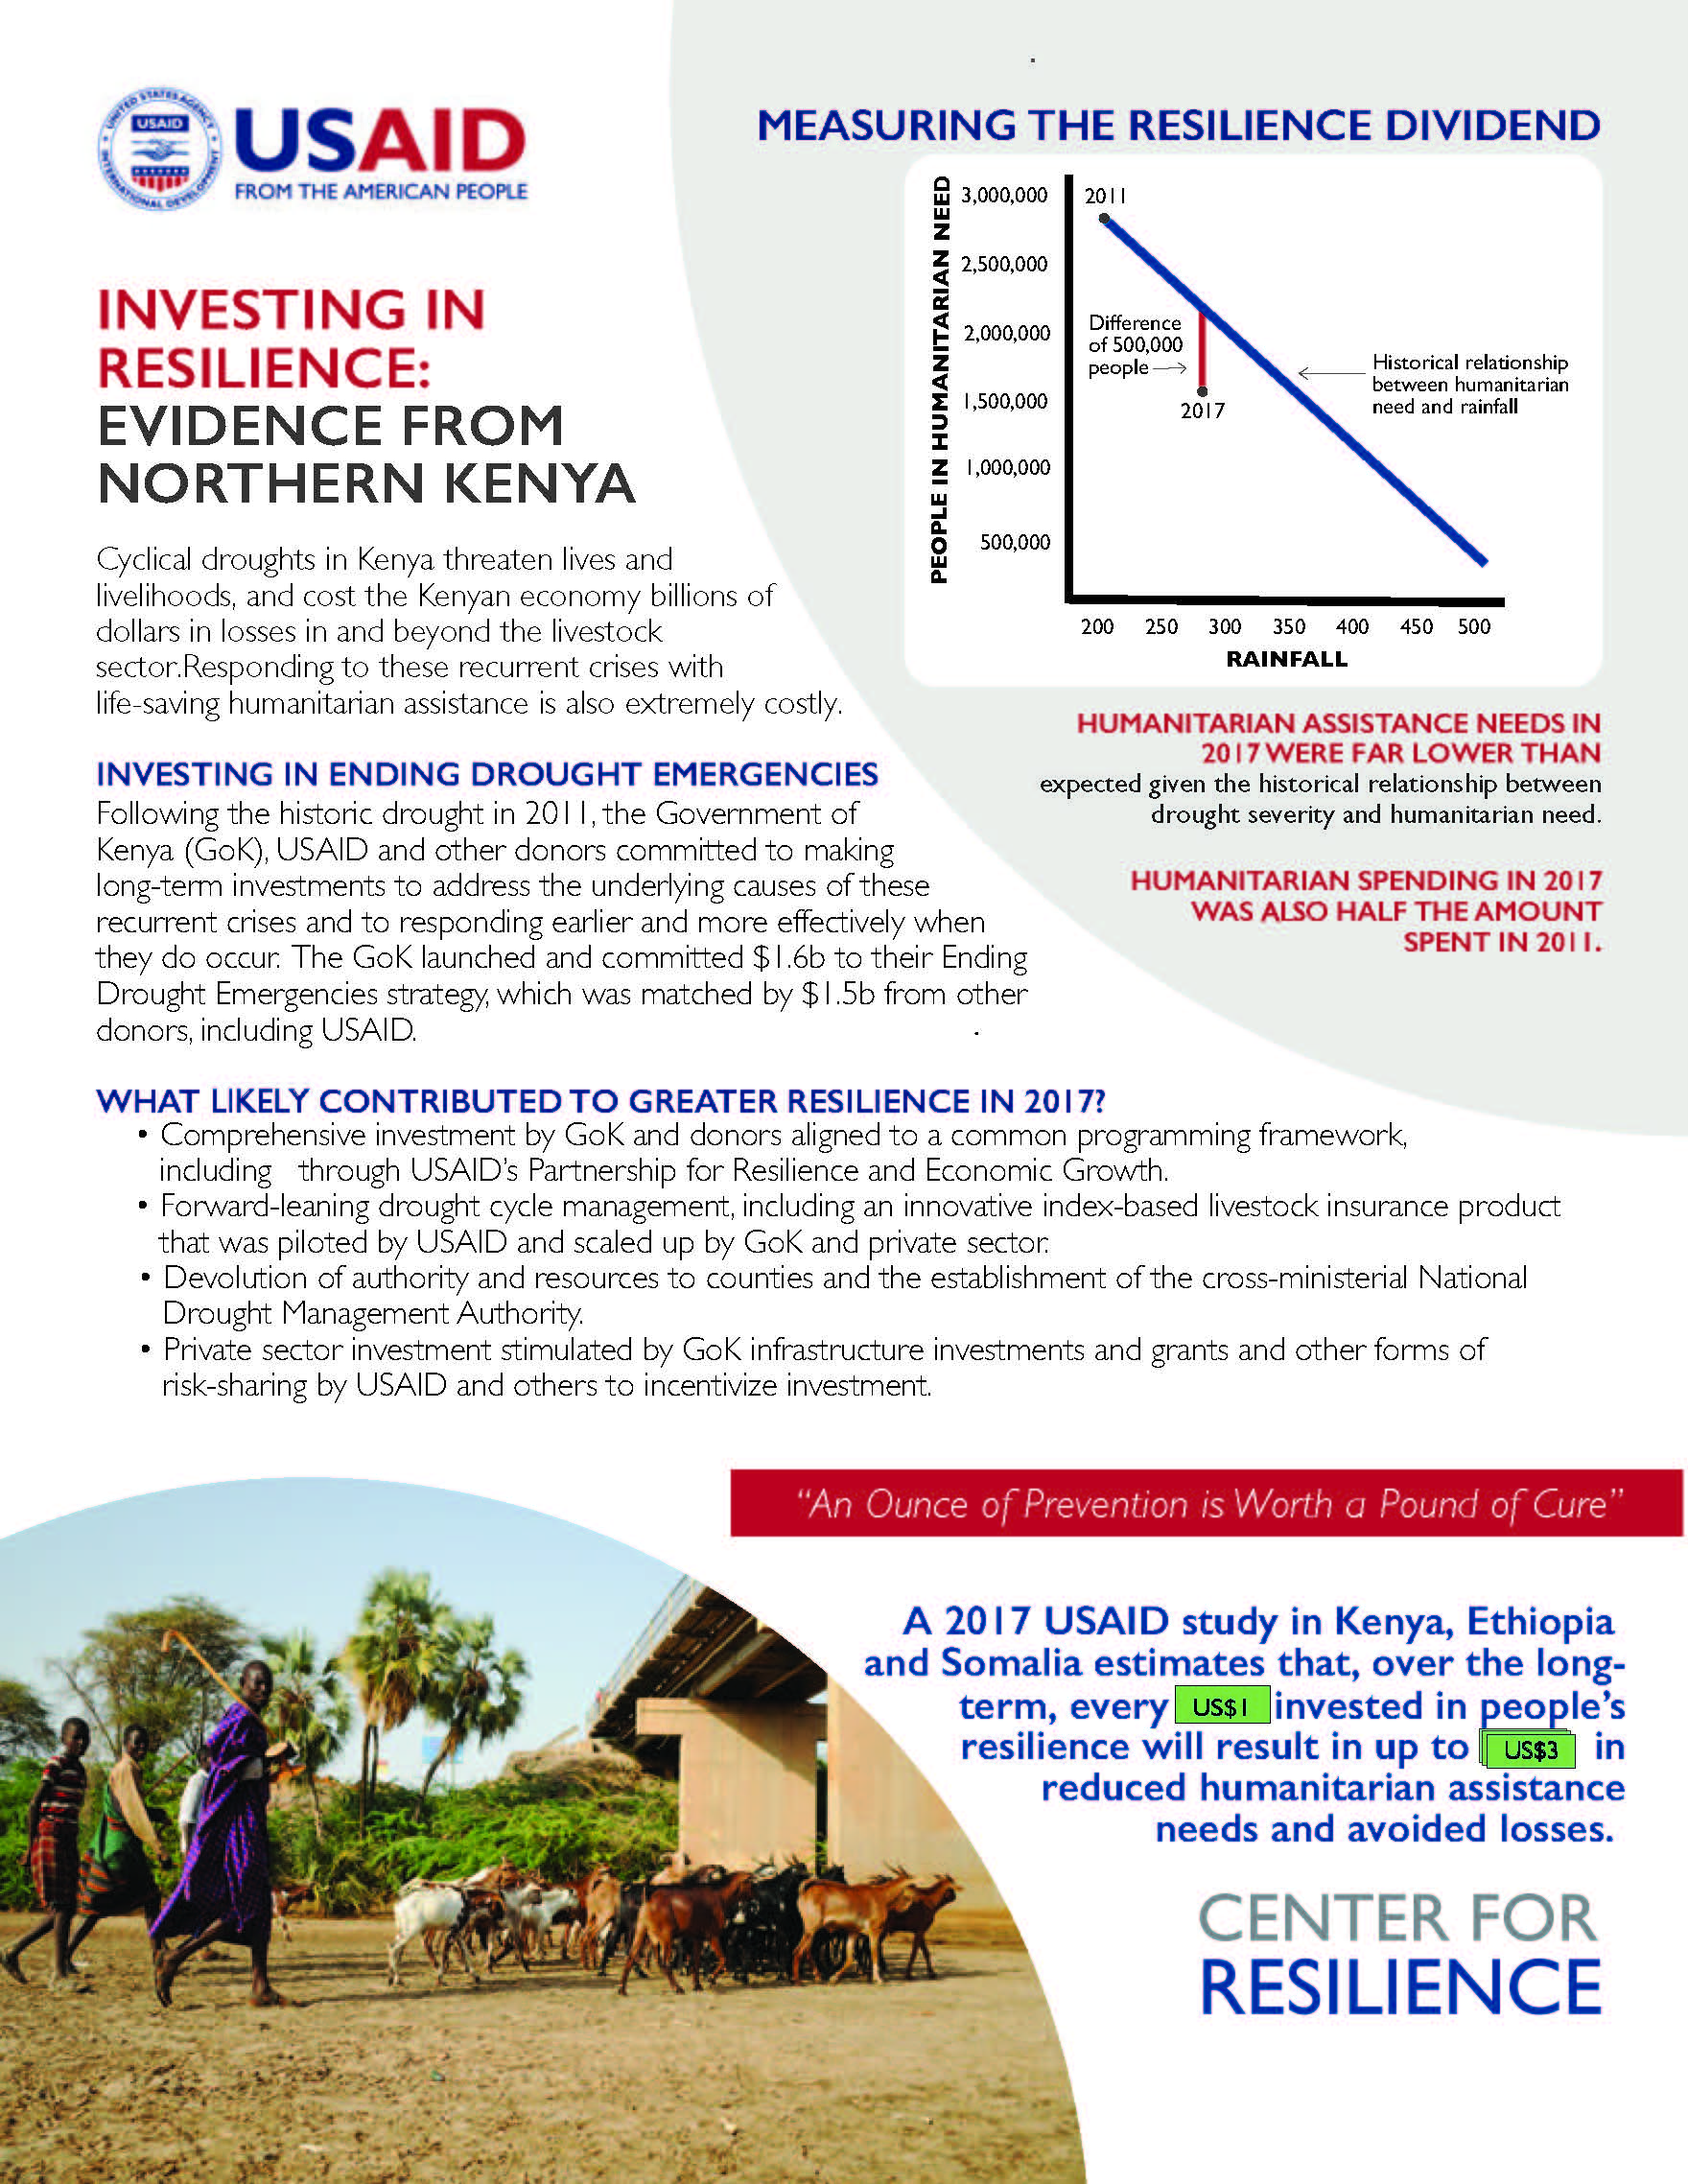 The Investing in Resilience: Evidence from Northern Kenya fact sheet